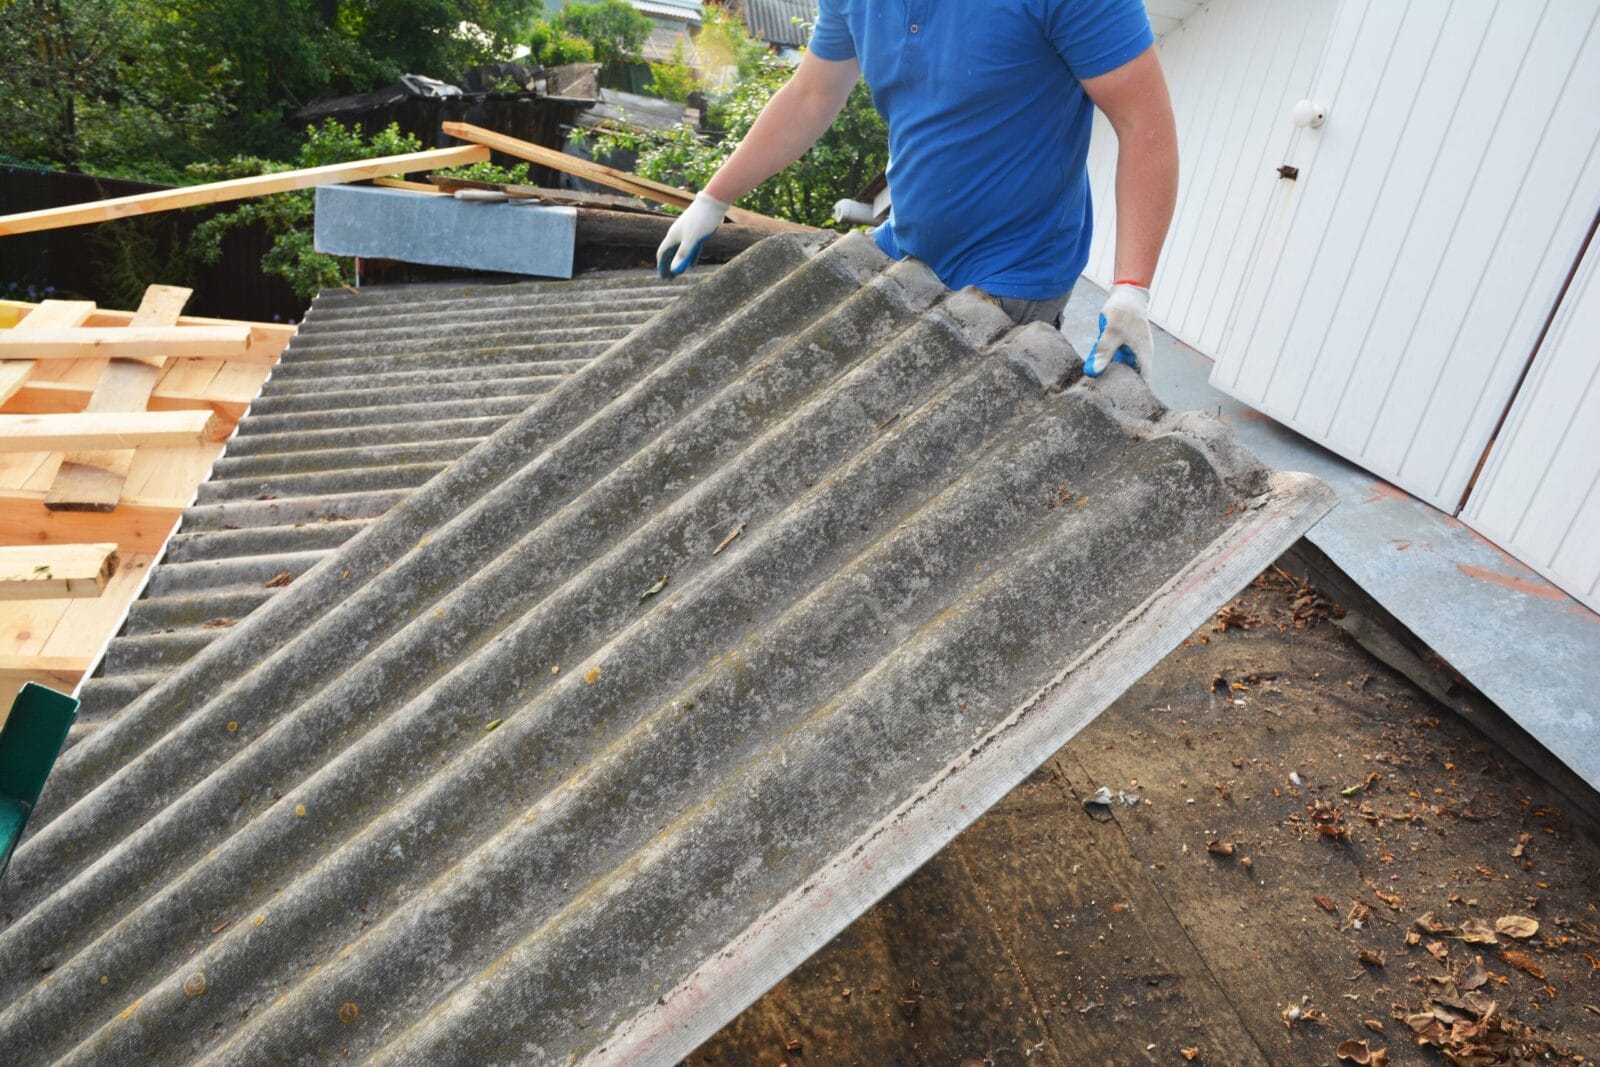 A man performing asbestos abatement on a roof.